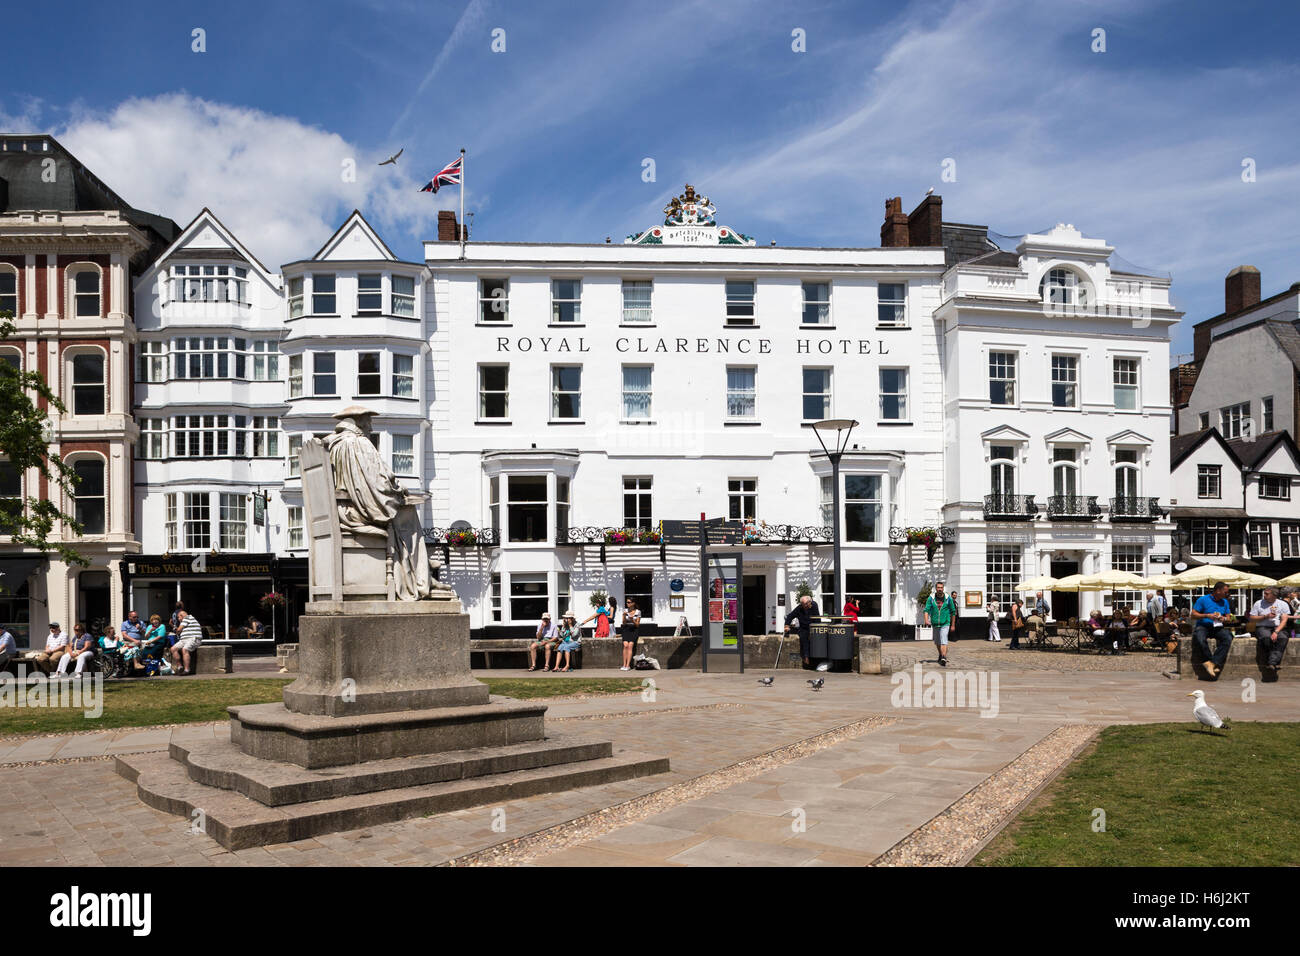 The Royal Clarence Hotel, destroyed by fire november 2016 Stock Photo